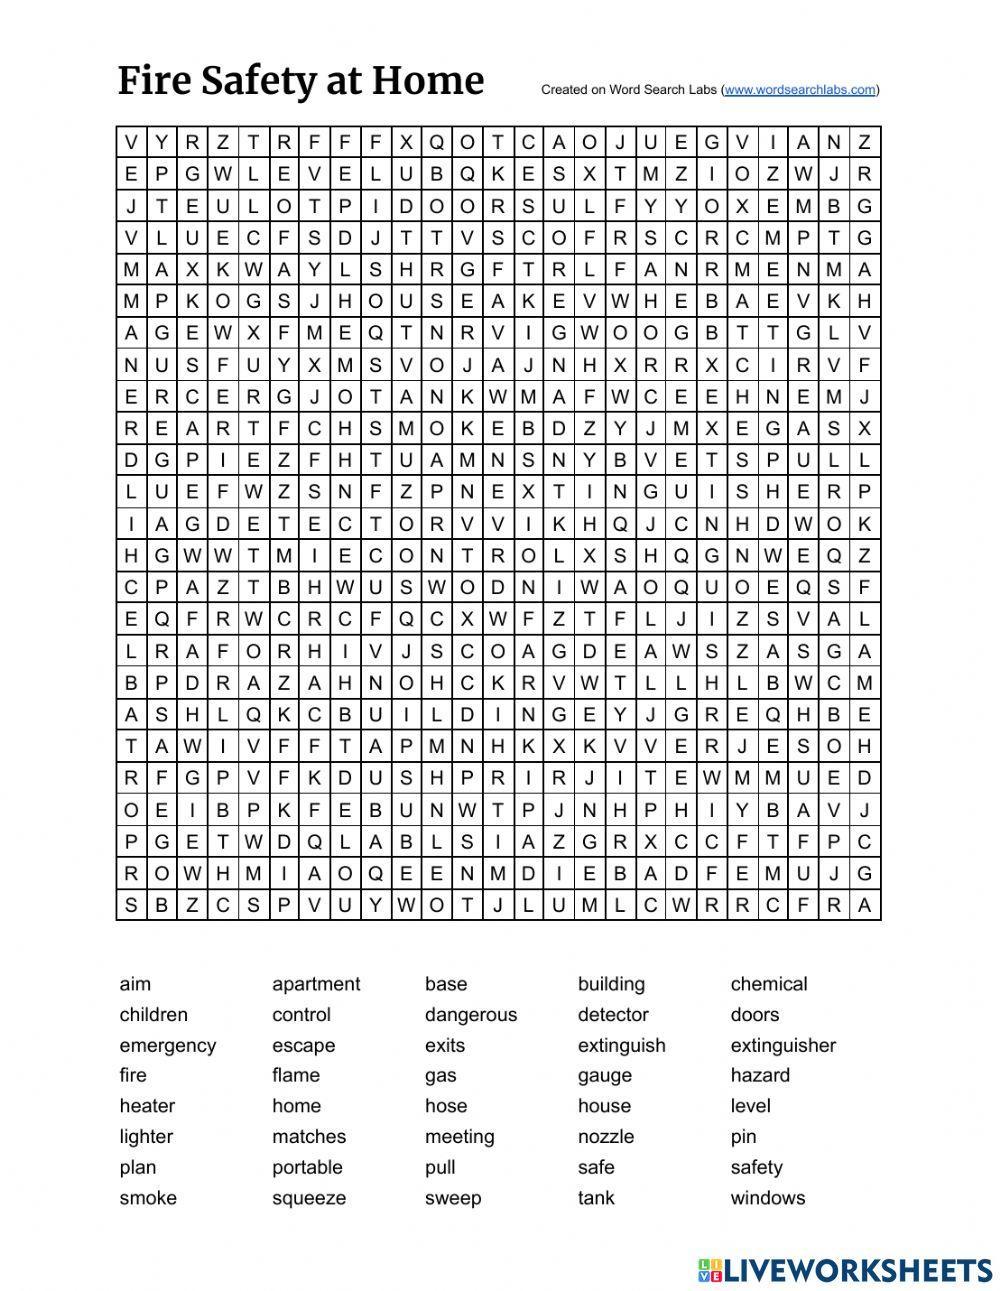 Wordsearch: Fire Safety at Home